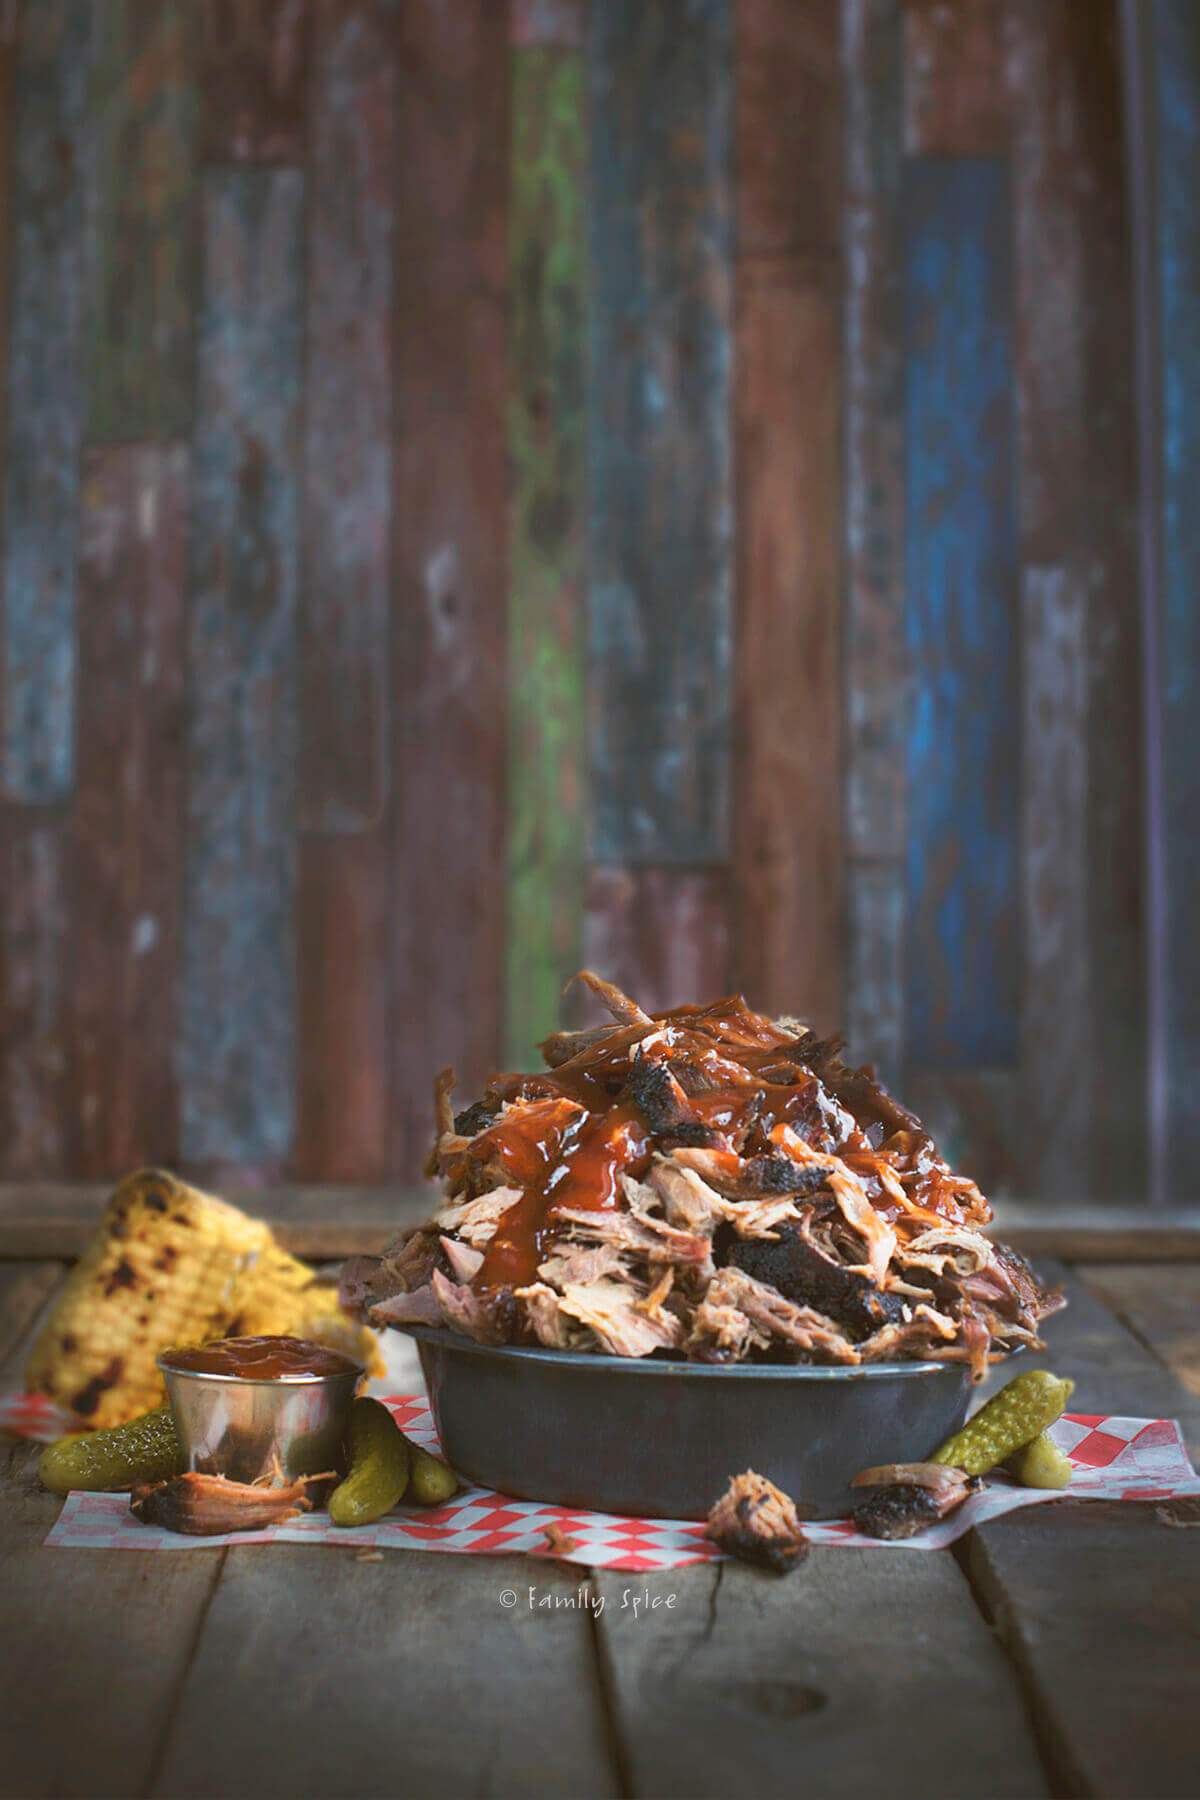 Side view of a metal bowl piled with smoked pulled pork topped with bbq sauce with corn and pickles next to it